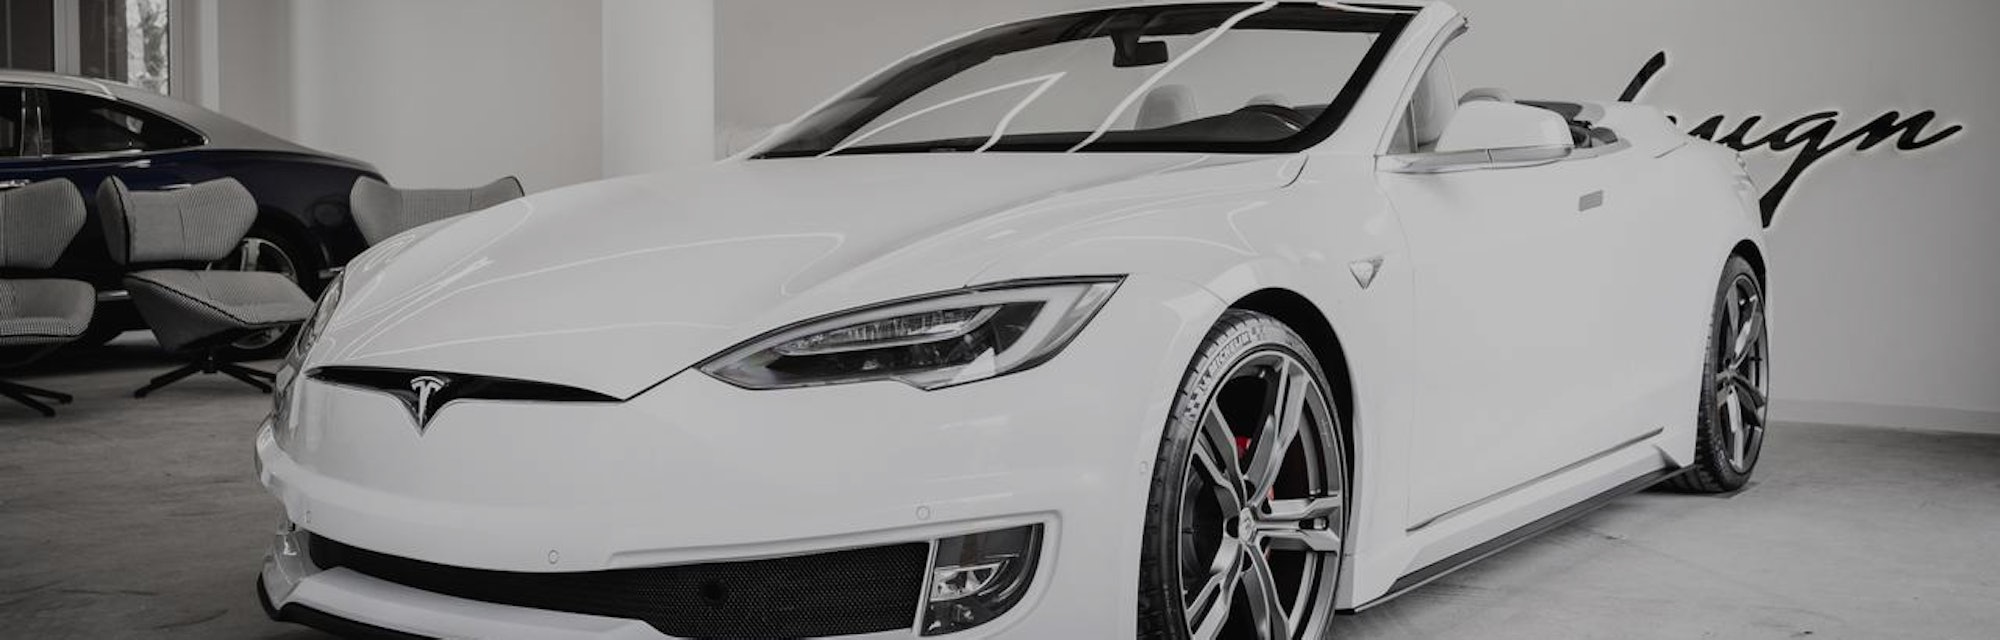 Italian automotive engineering firm Ares Design created a Tesla Model S convertible.